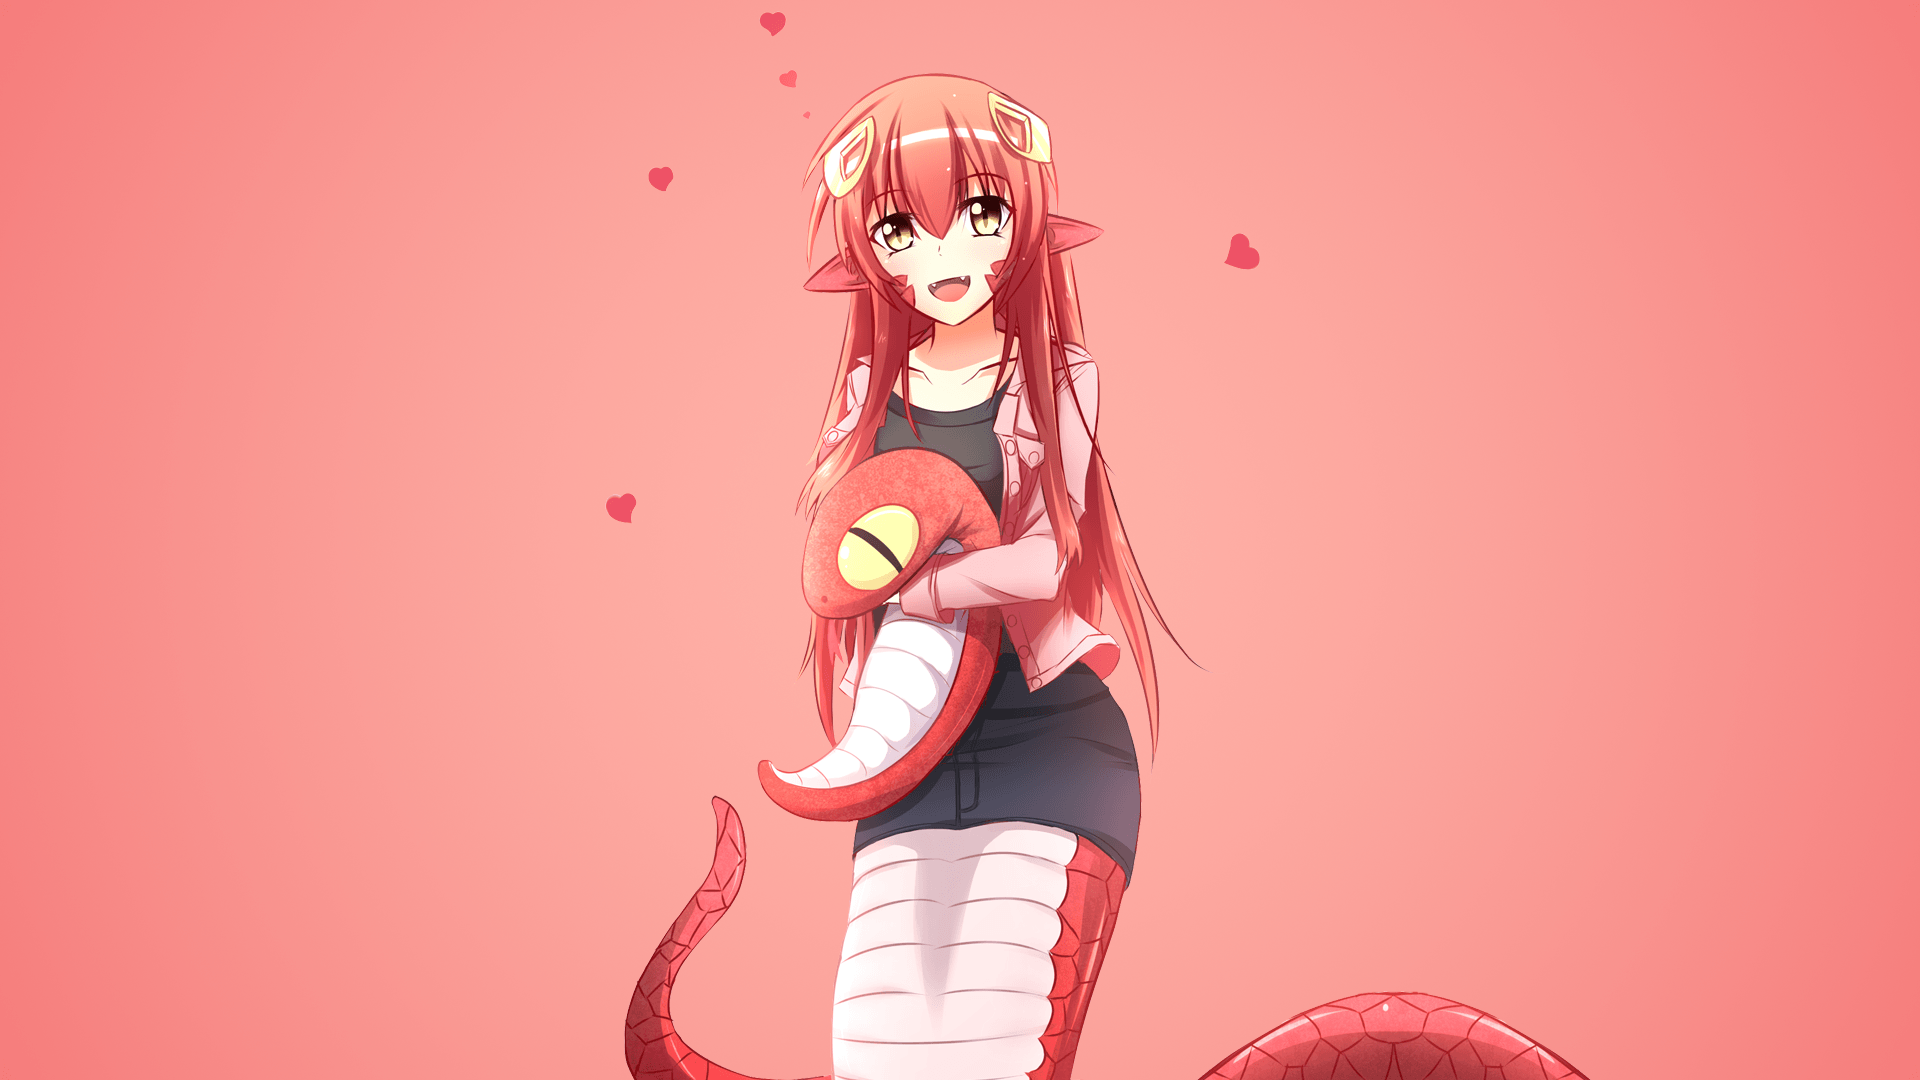 Request Could someone make the background a darker colour? Miia